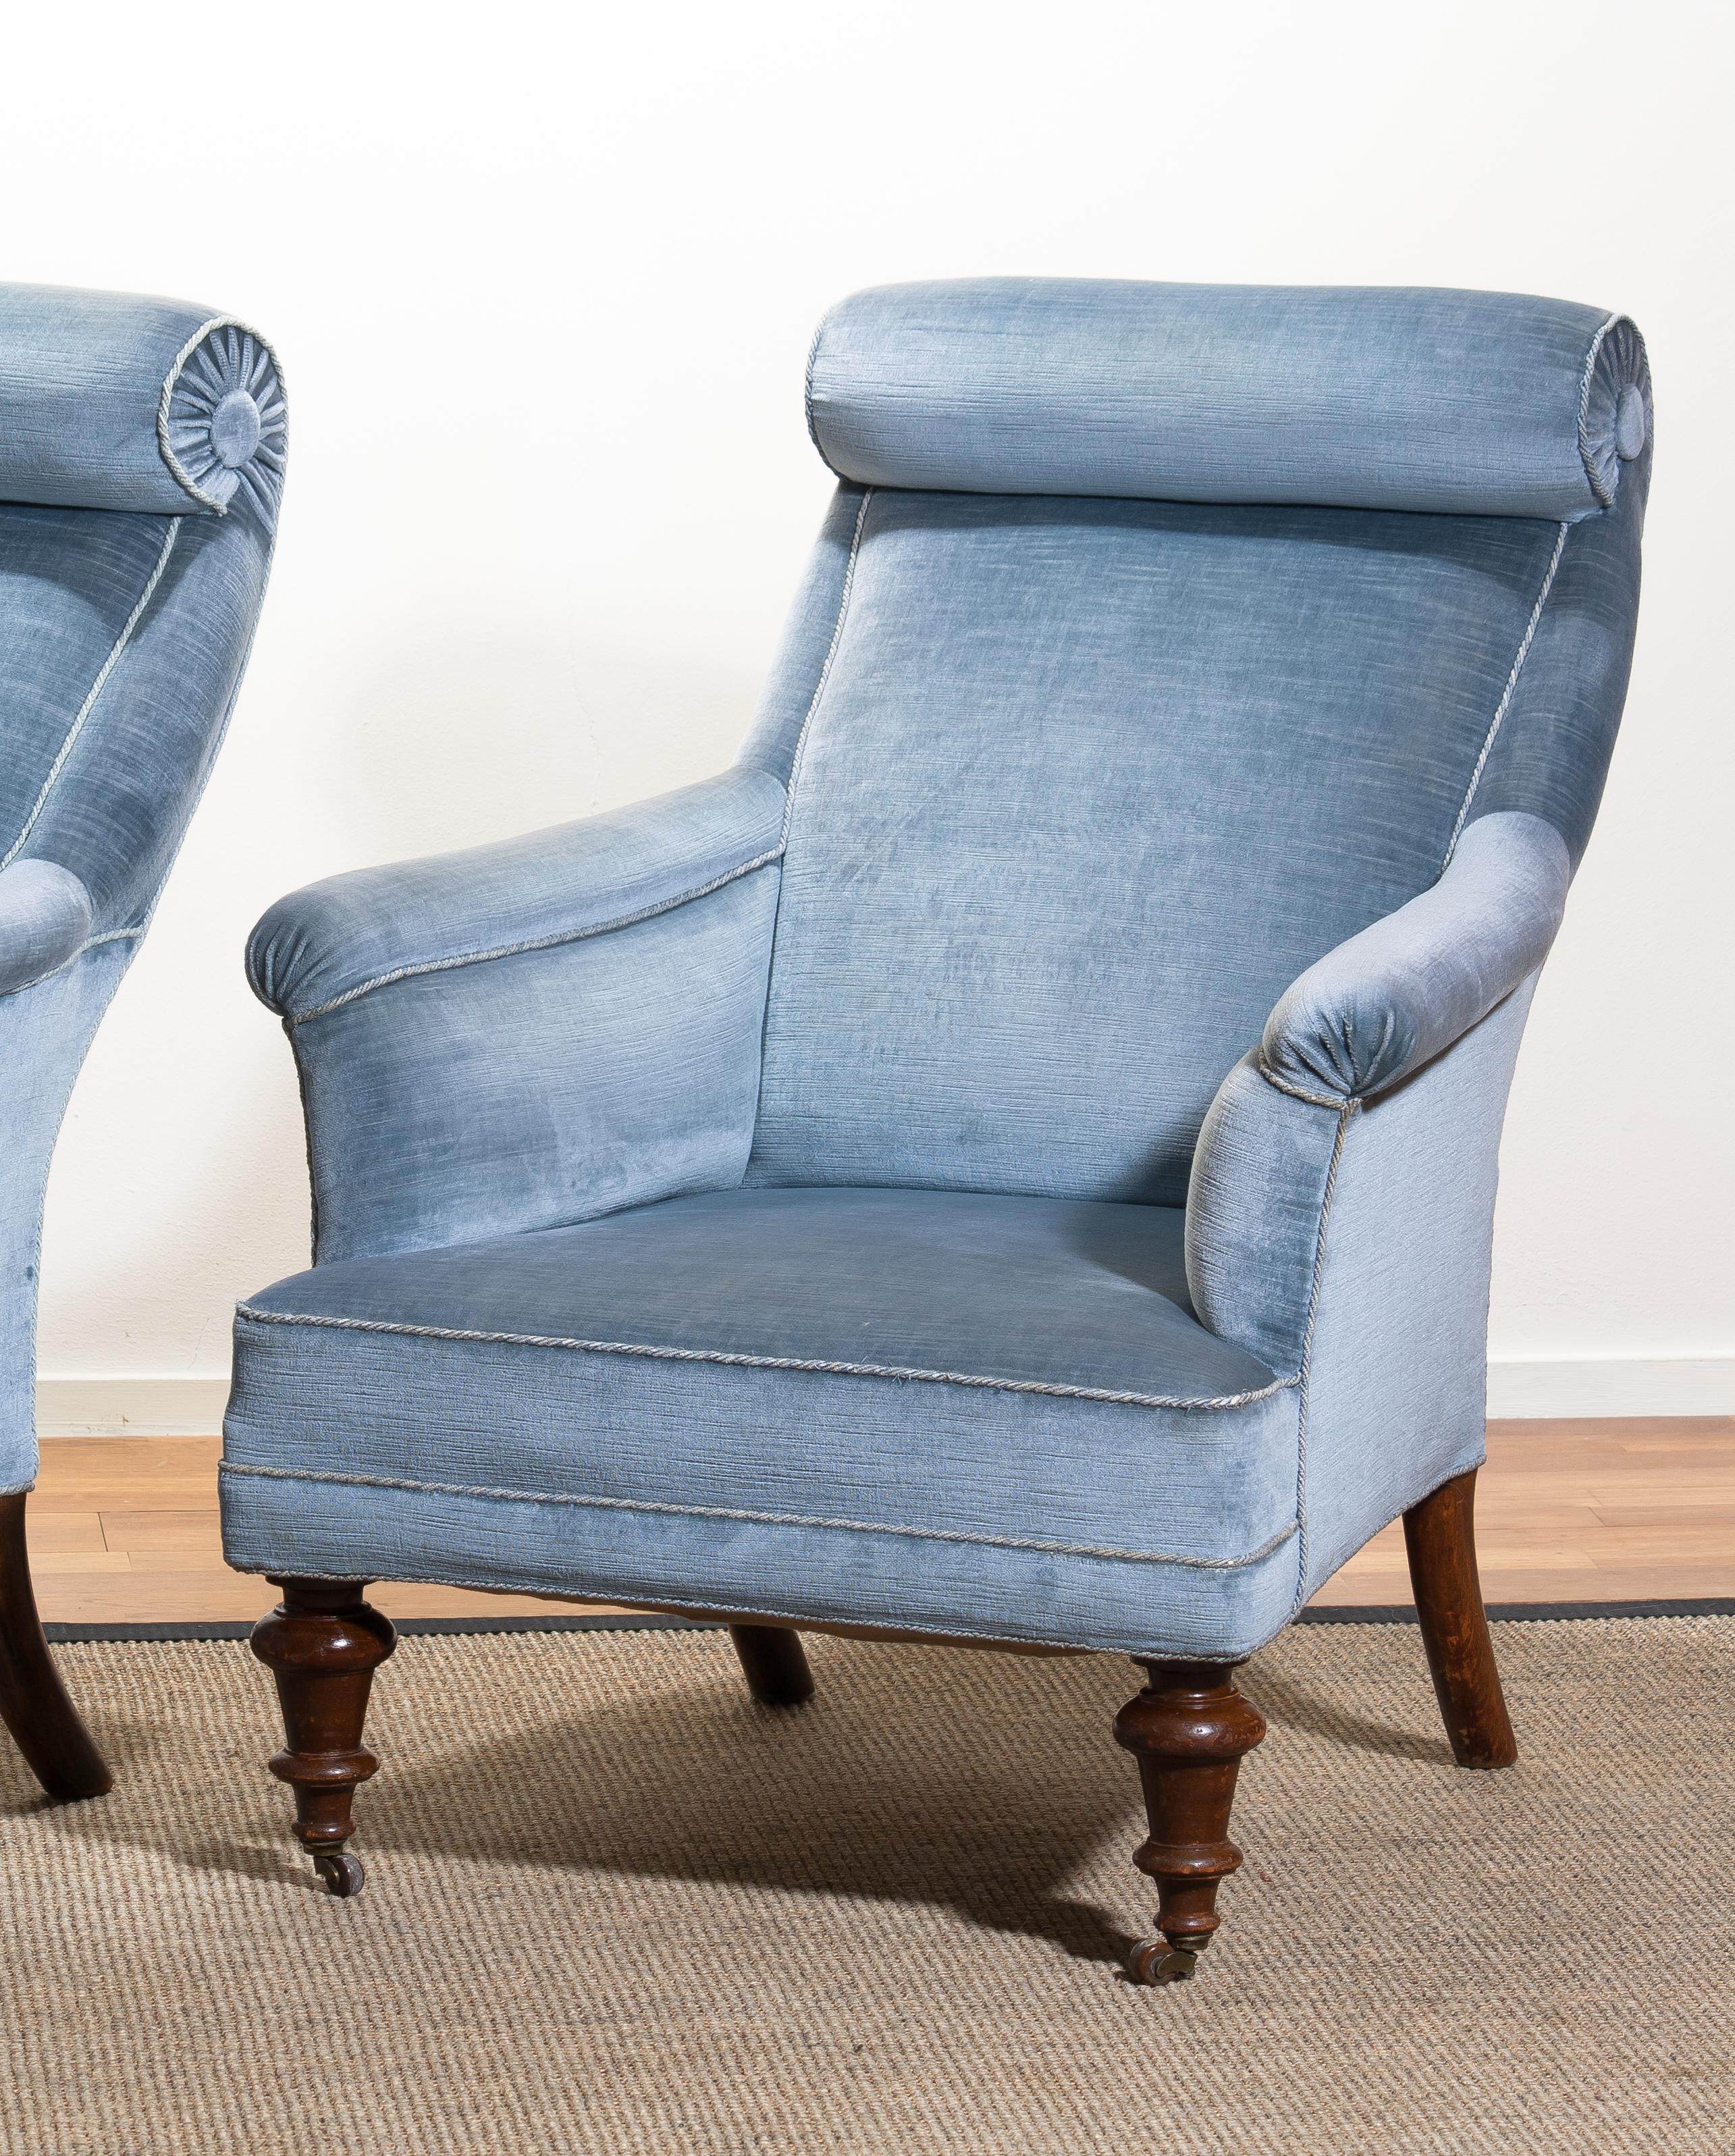 1900s Set of Two Ice Blue Velvet Dorothy Draper Style Bergère / Lounge Chairs 5